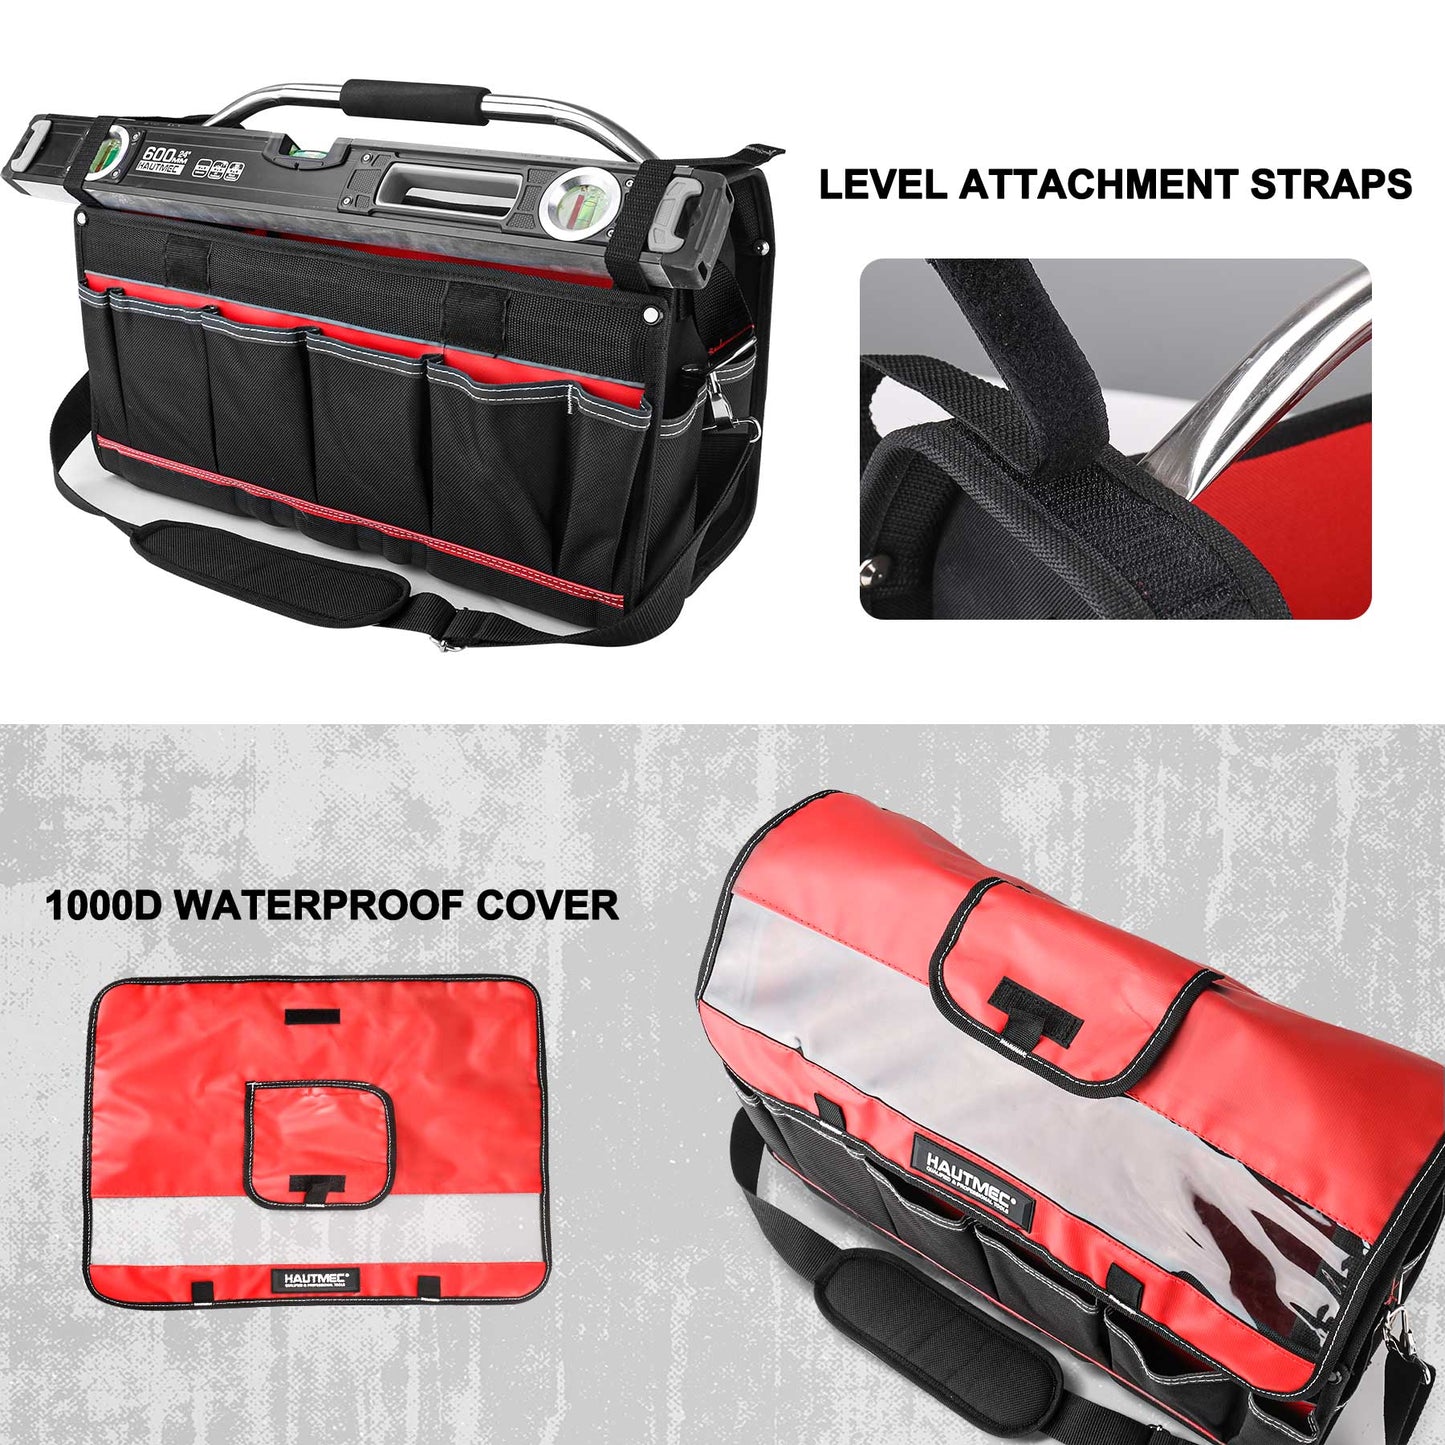 HAUTMEC 20-Inch Pro Tool Tote,Heavy Duty Wide Mouth Open Top Tool Bag with 1000D Waterproof Cover and Ajustable Shoulder Strap for Tool Organizer HT0296